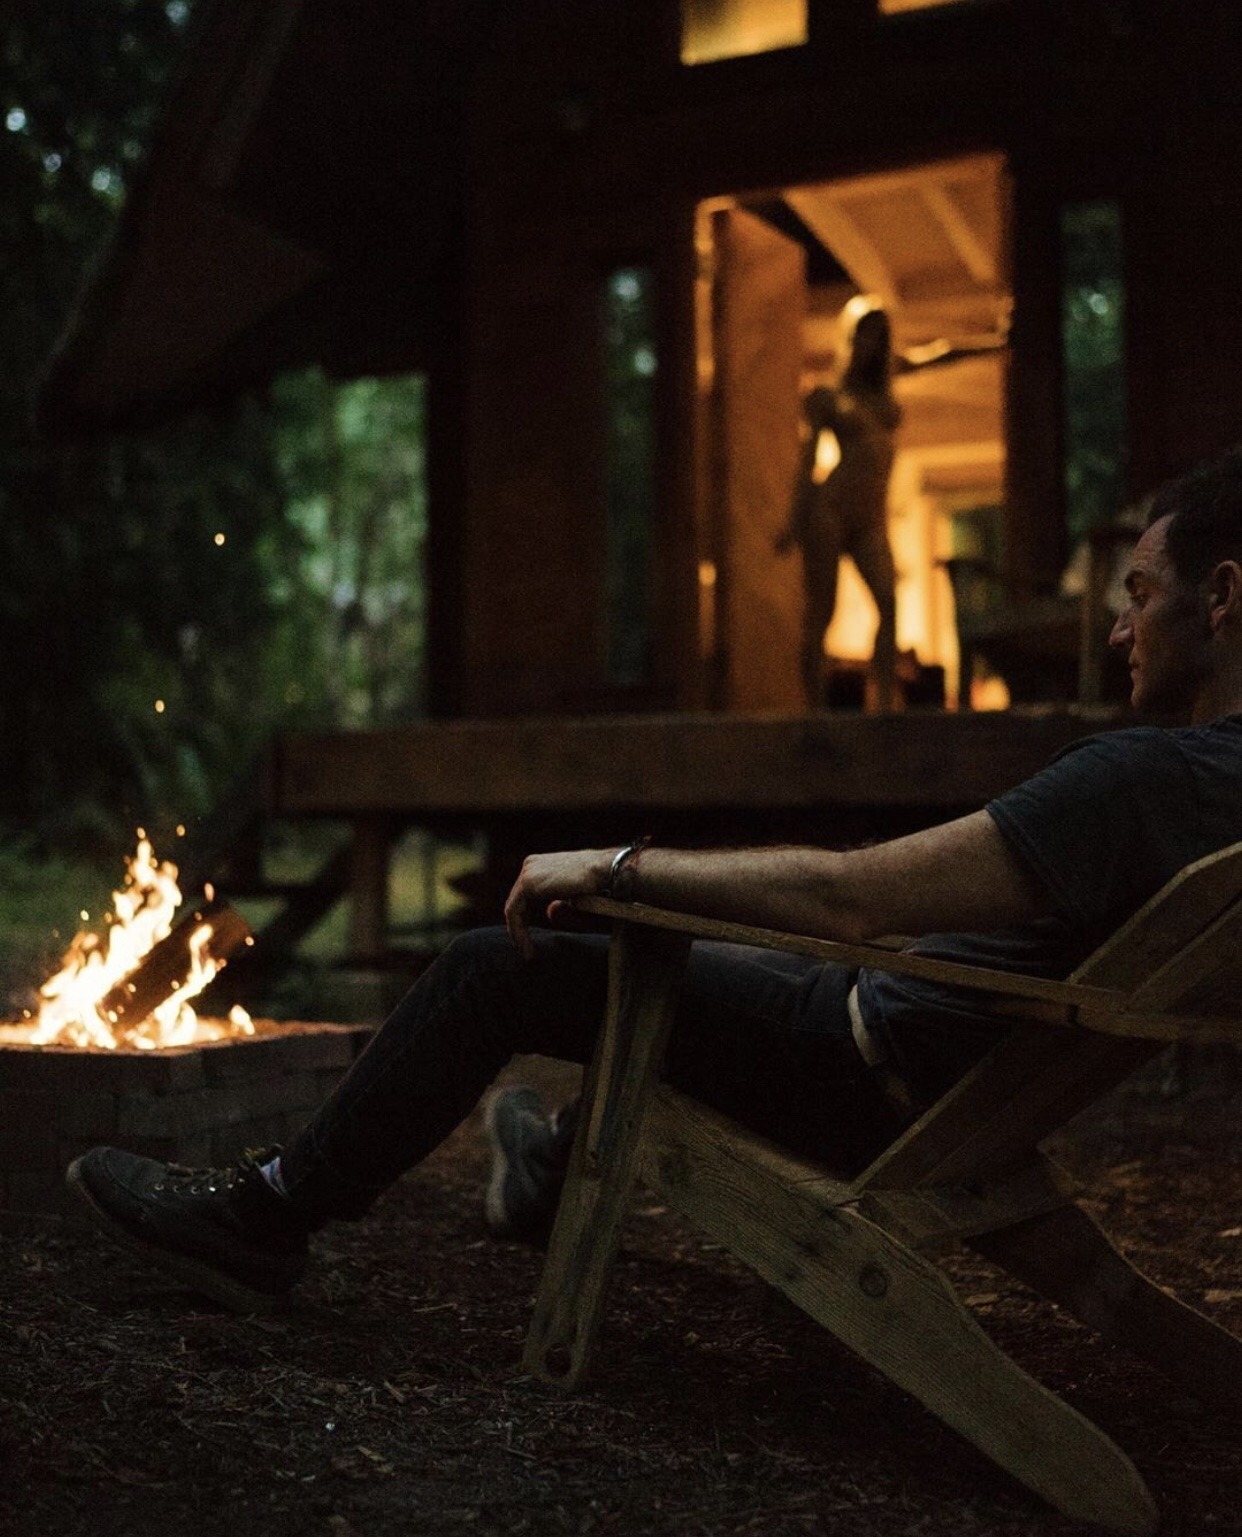 sexyhexe87: Need this in my life , a getaway to a cabin and sitting by the fire with